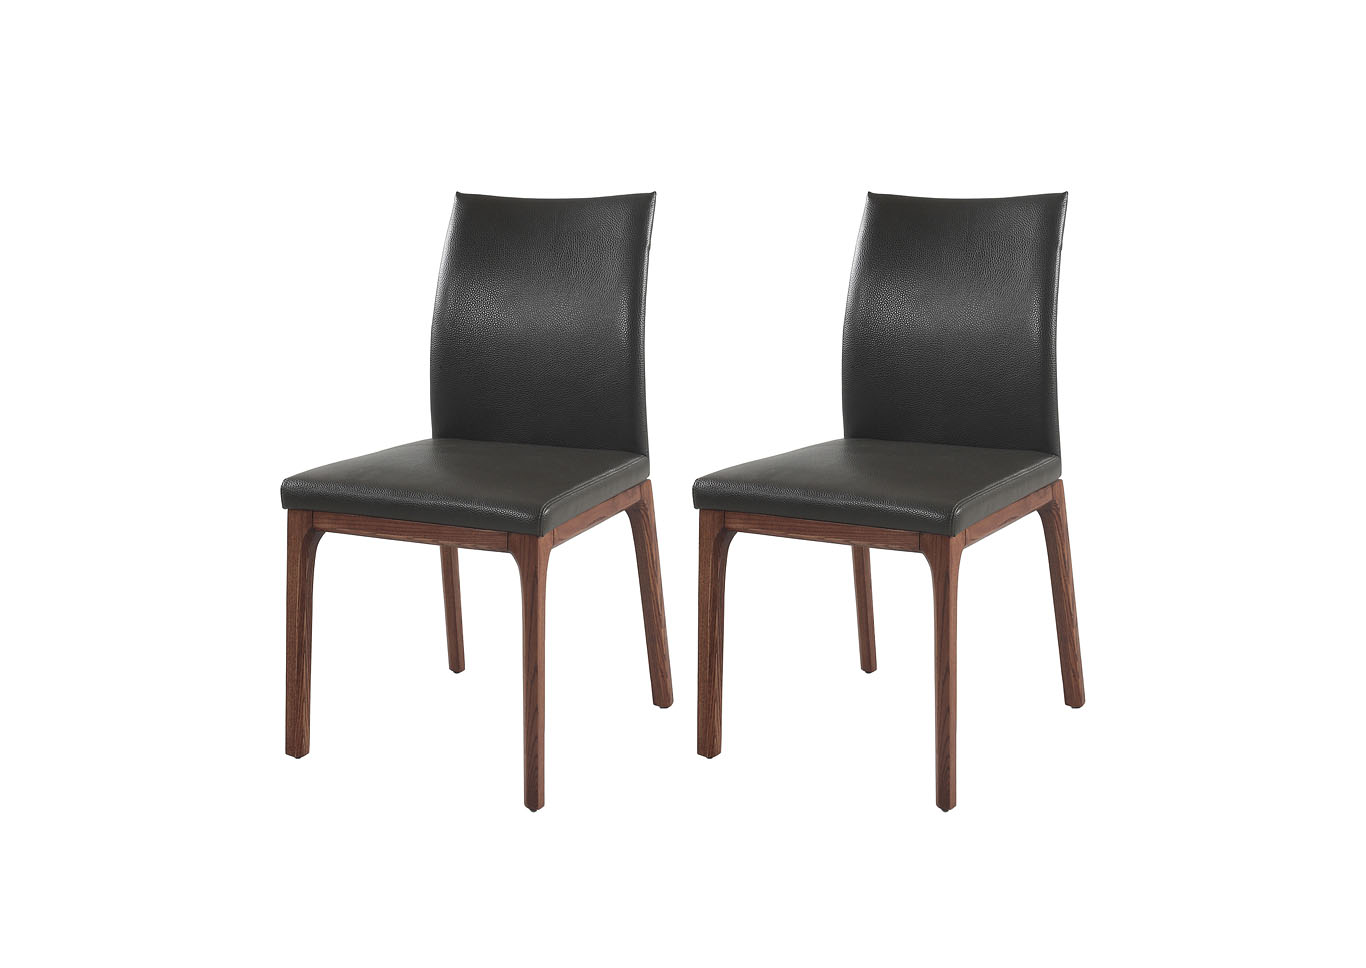 Sage Walnut & Dark Grey Solid Wood Chair (Set of 2) w/ Textured Seat & Back,Chintaly Imports